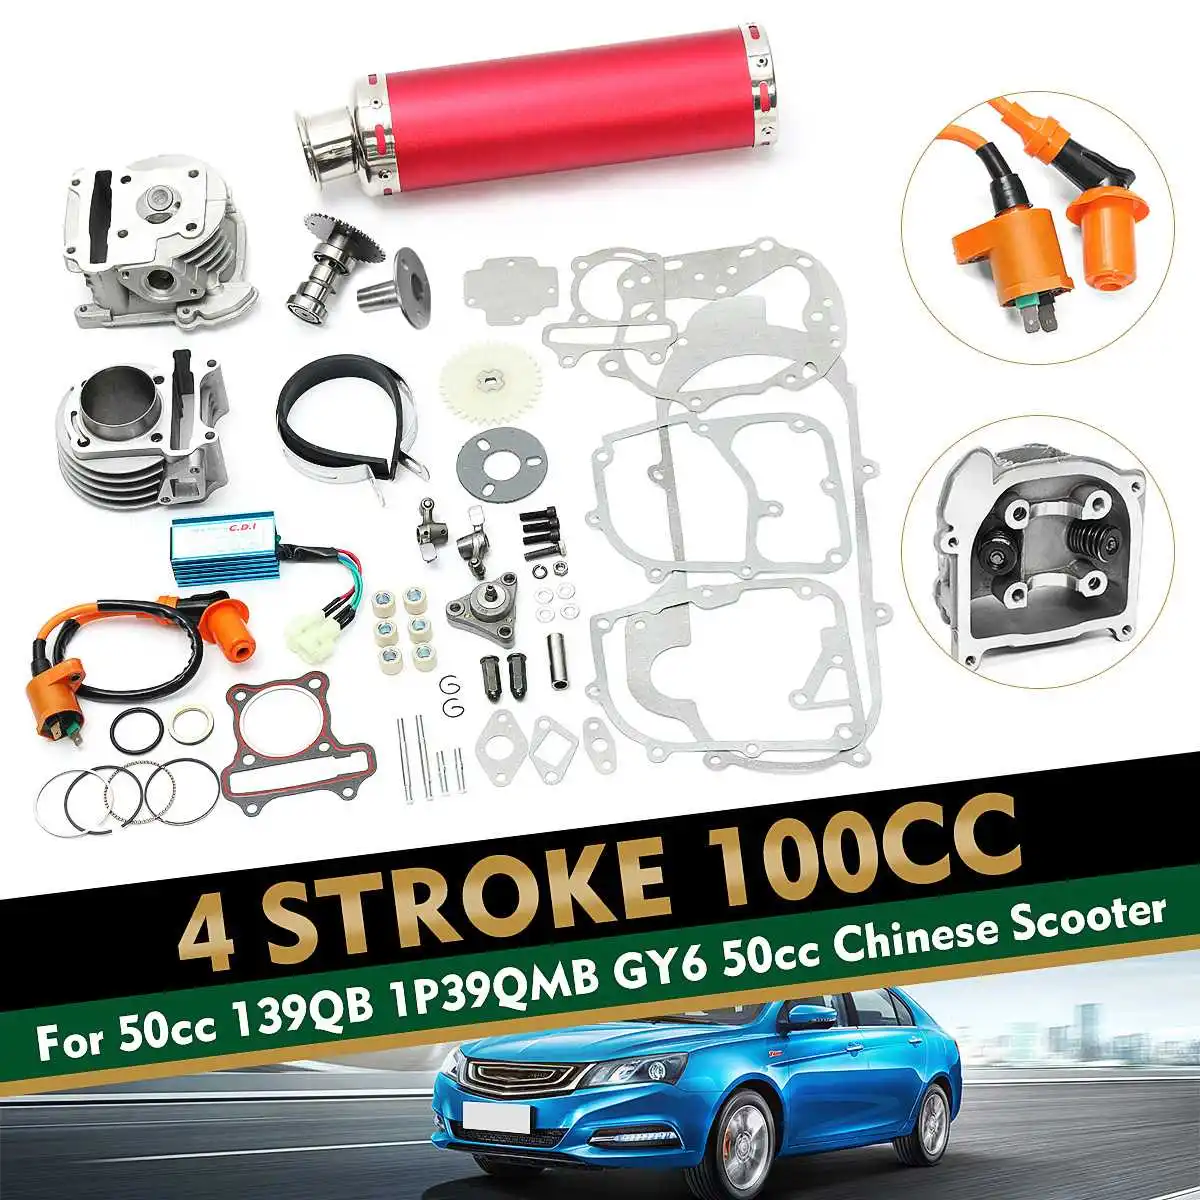 

100CC 50MM Big Bore Scooter Kits Cylinder Piston Ring Power Pack Exhaust Pipe For 139QMB 1P39QMB For 4 Stroke Scooter GY6 50CC